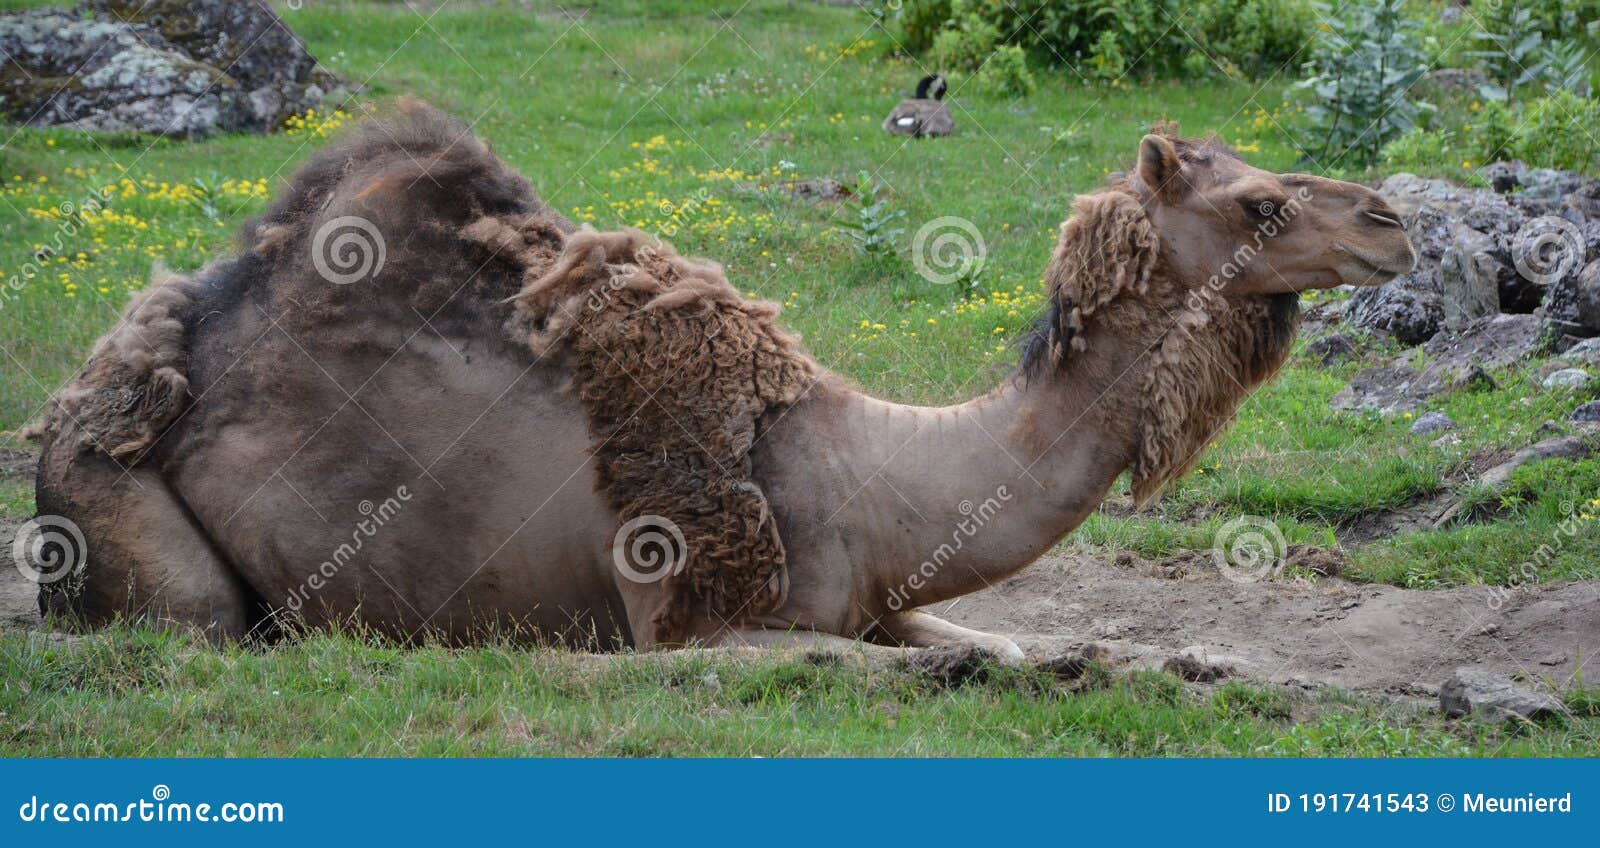 camel  is an ungulate within the genus camelus,